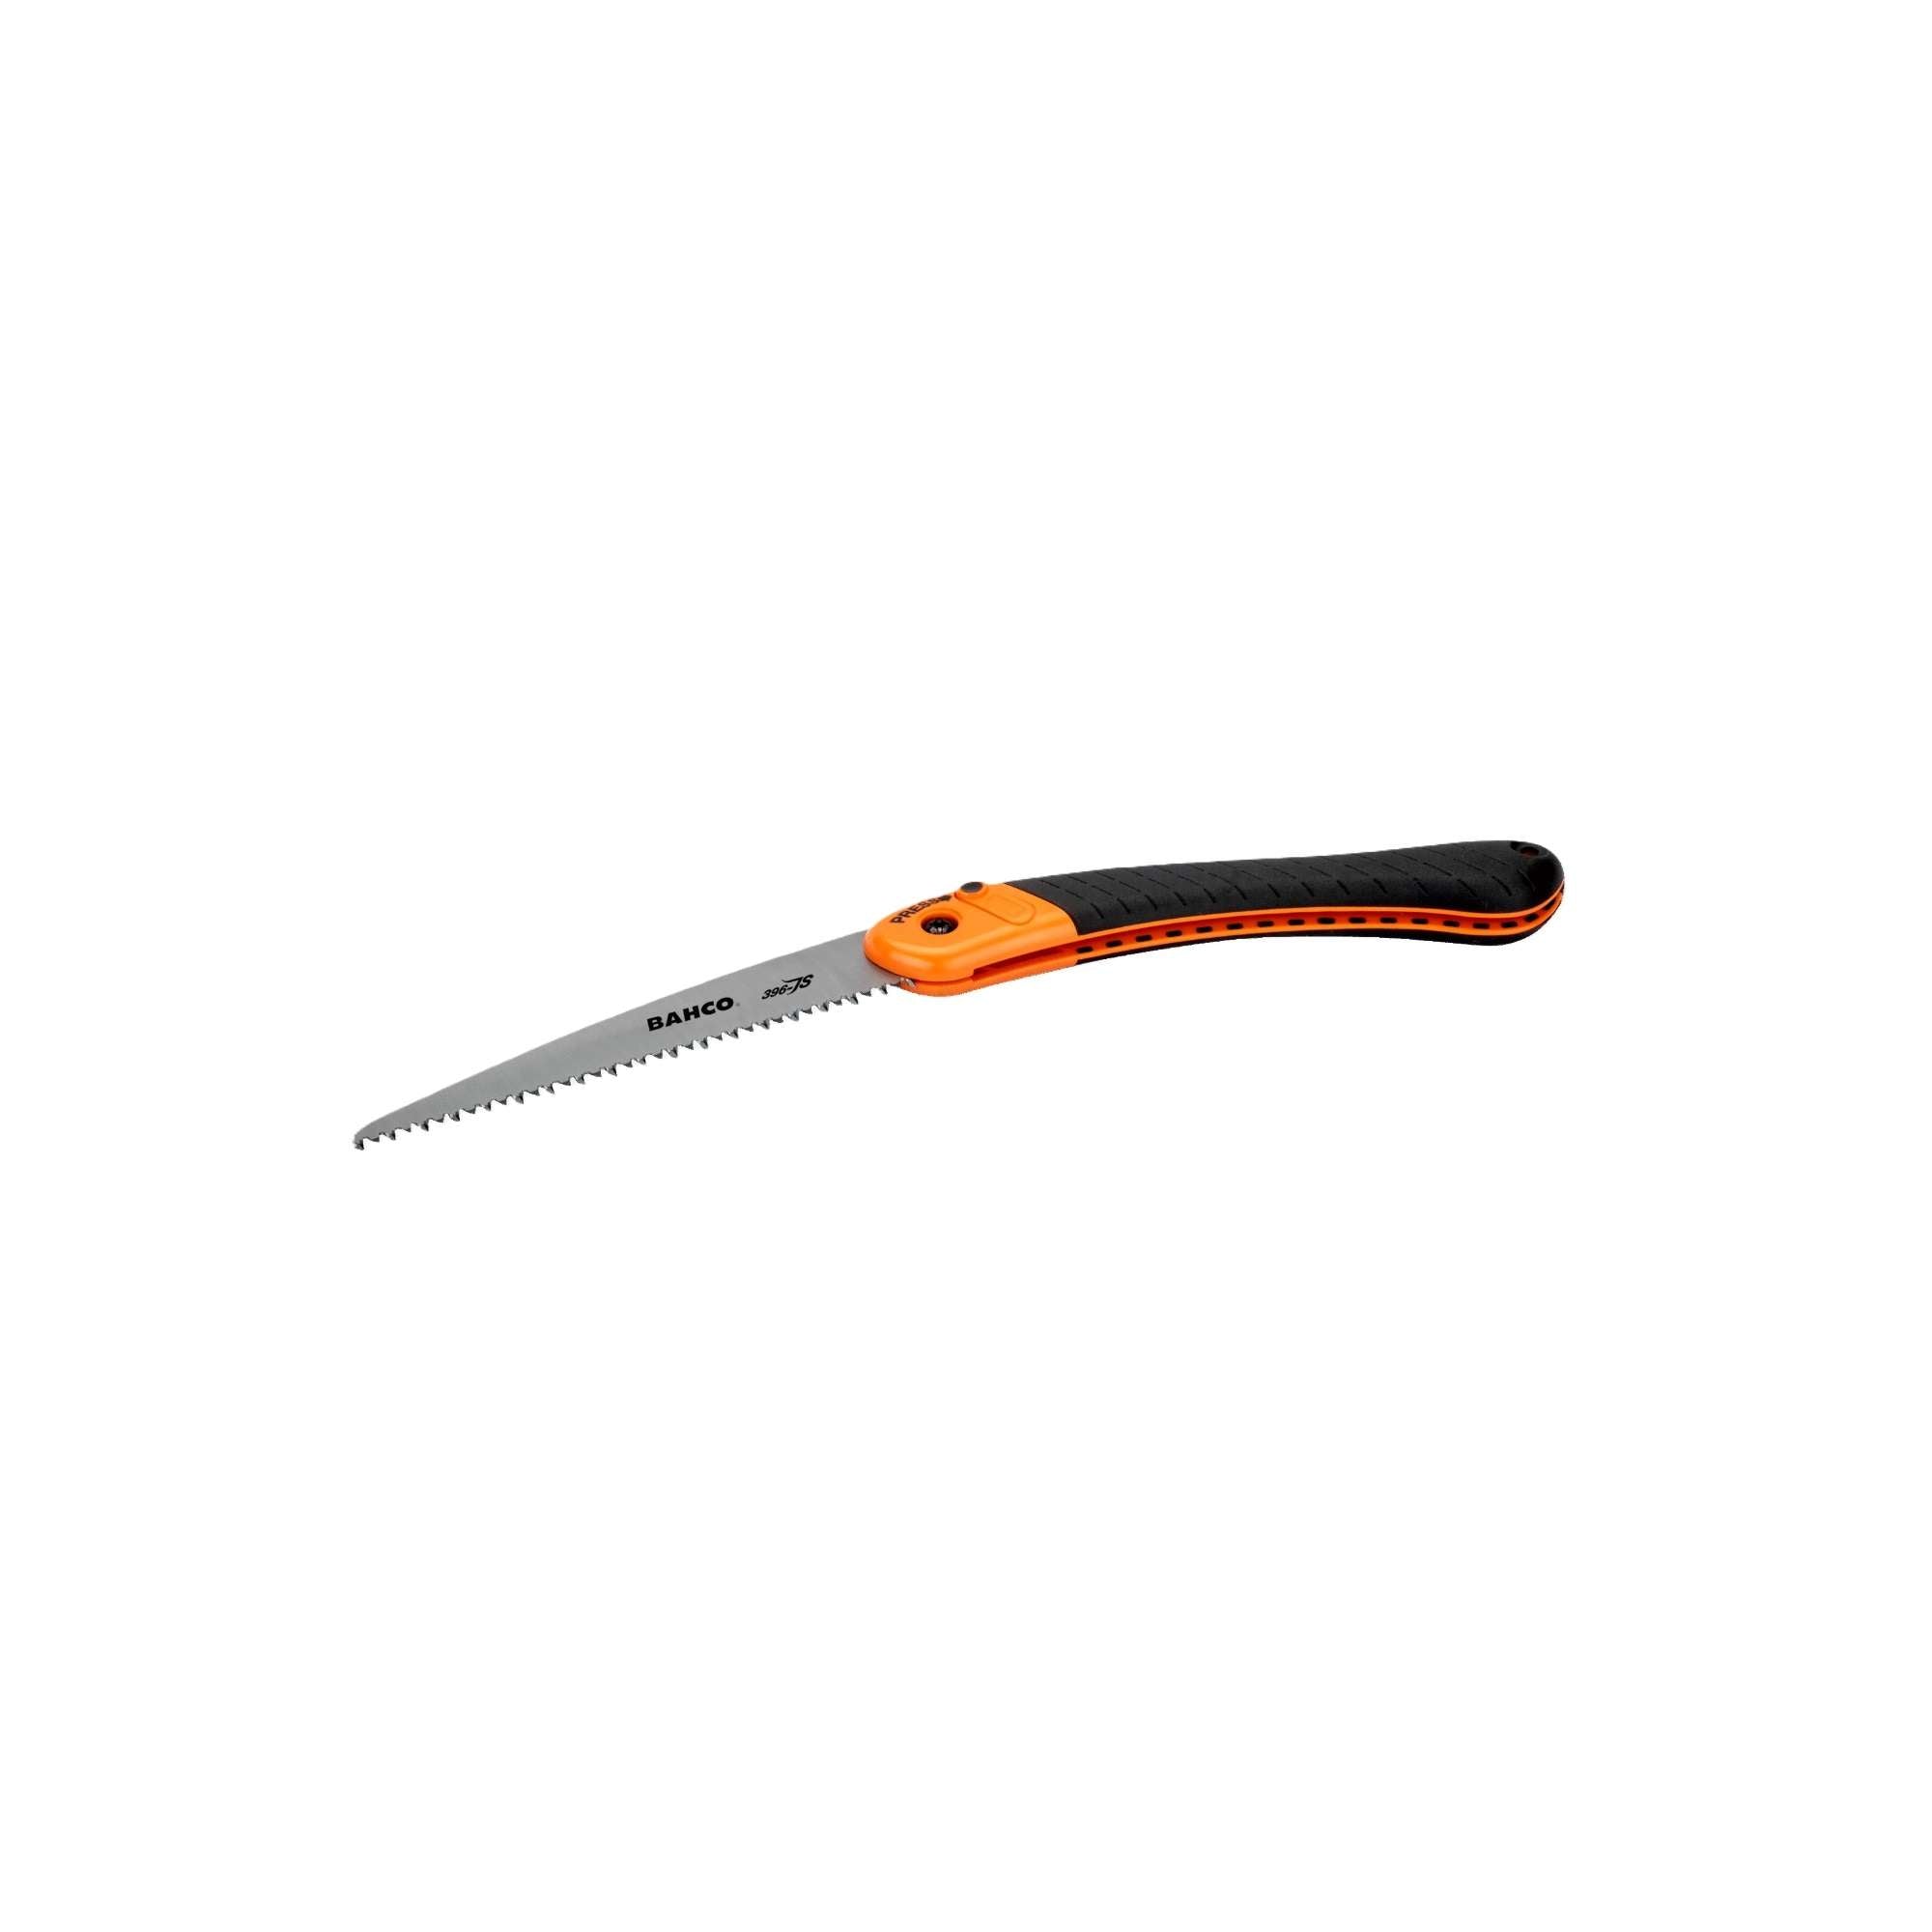 Serrated Saw for Cutting Green Wood - Bahco 396-JS